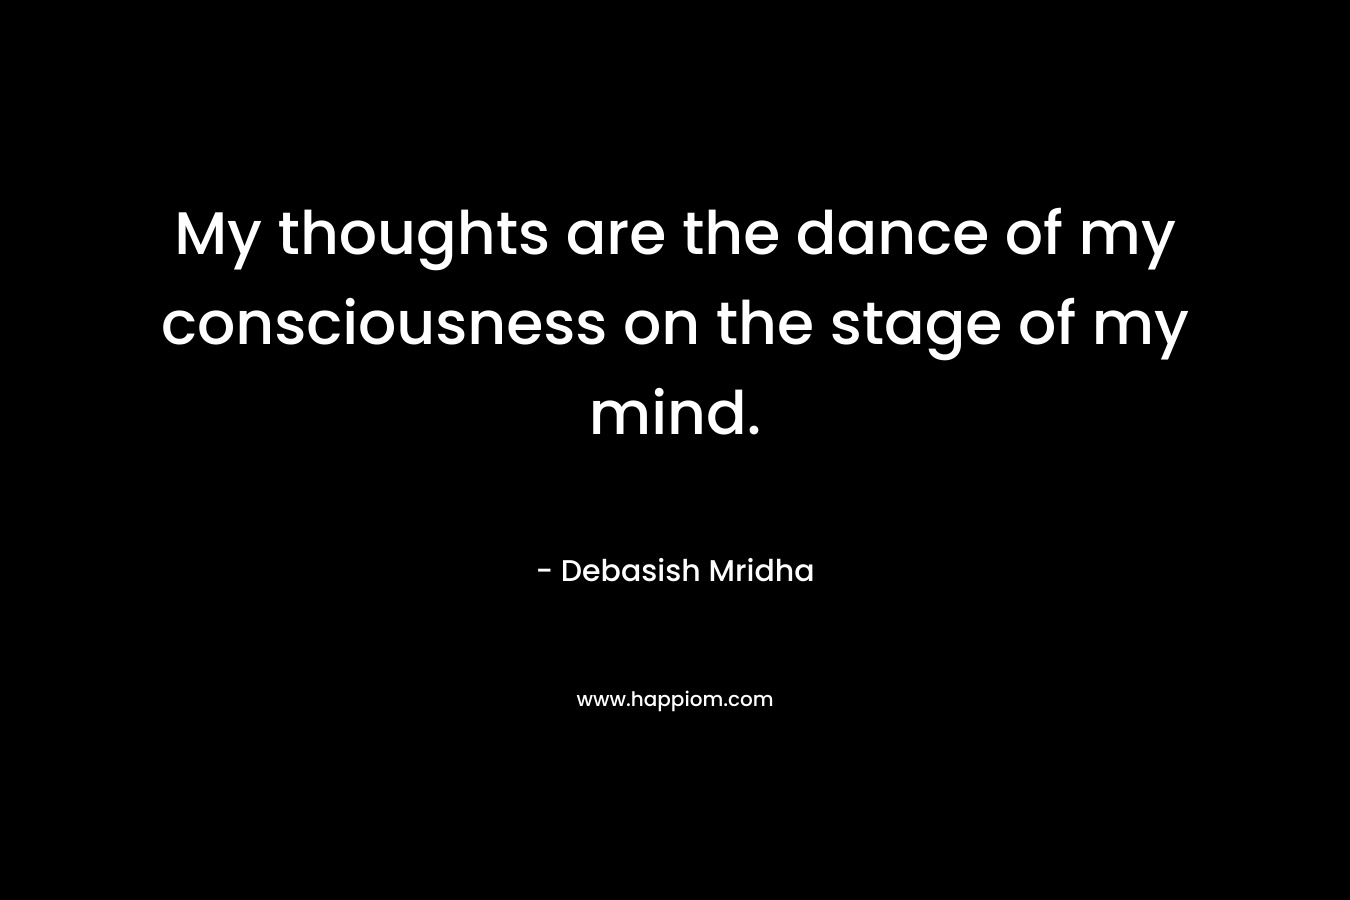 My thoughts are the dance of my consciousness on the stage of my mind.